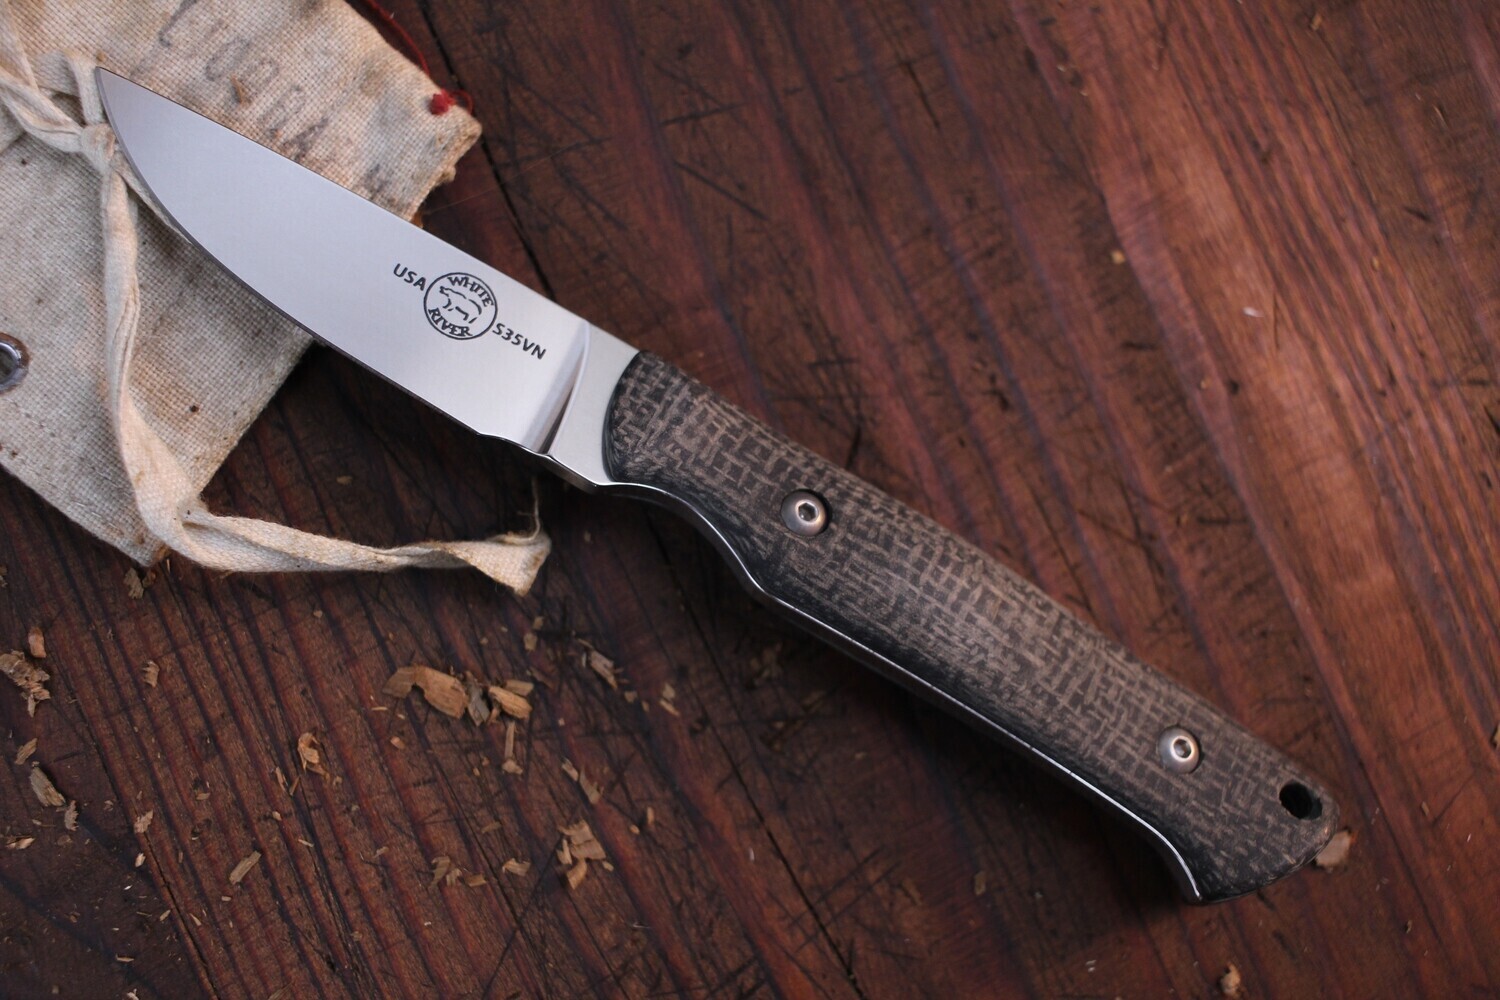 White River Knives Small Game 2.62" Fixed Blade / Black Burlap Micarta / Polished CPM-S35VN / Leather Sheath